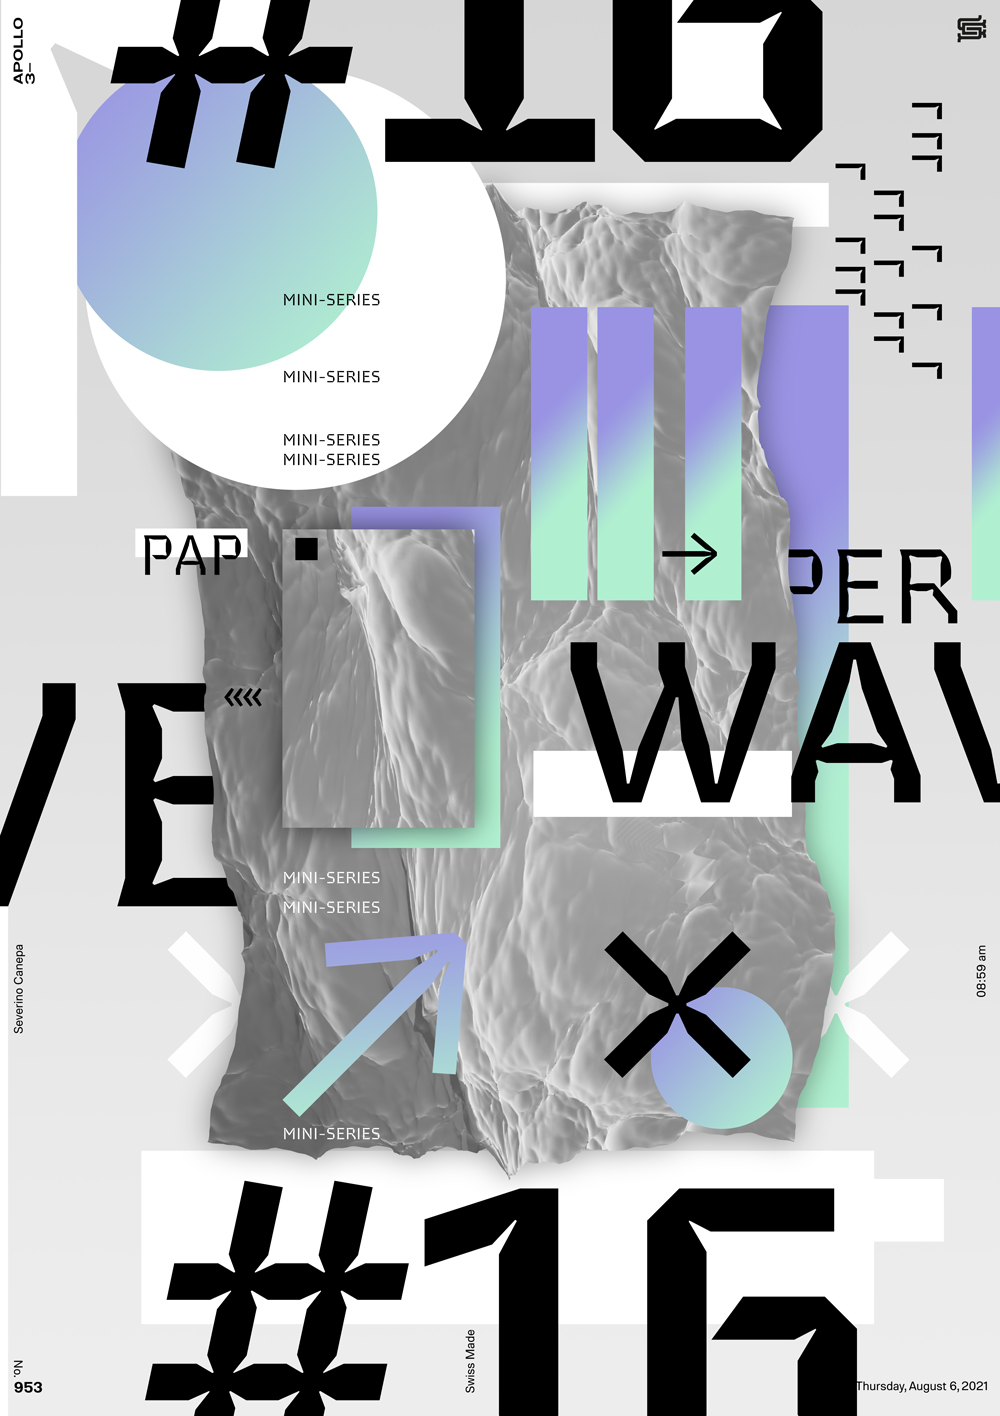 Electric composition made with stylish typography and forms